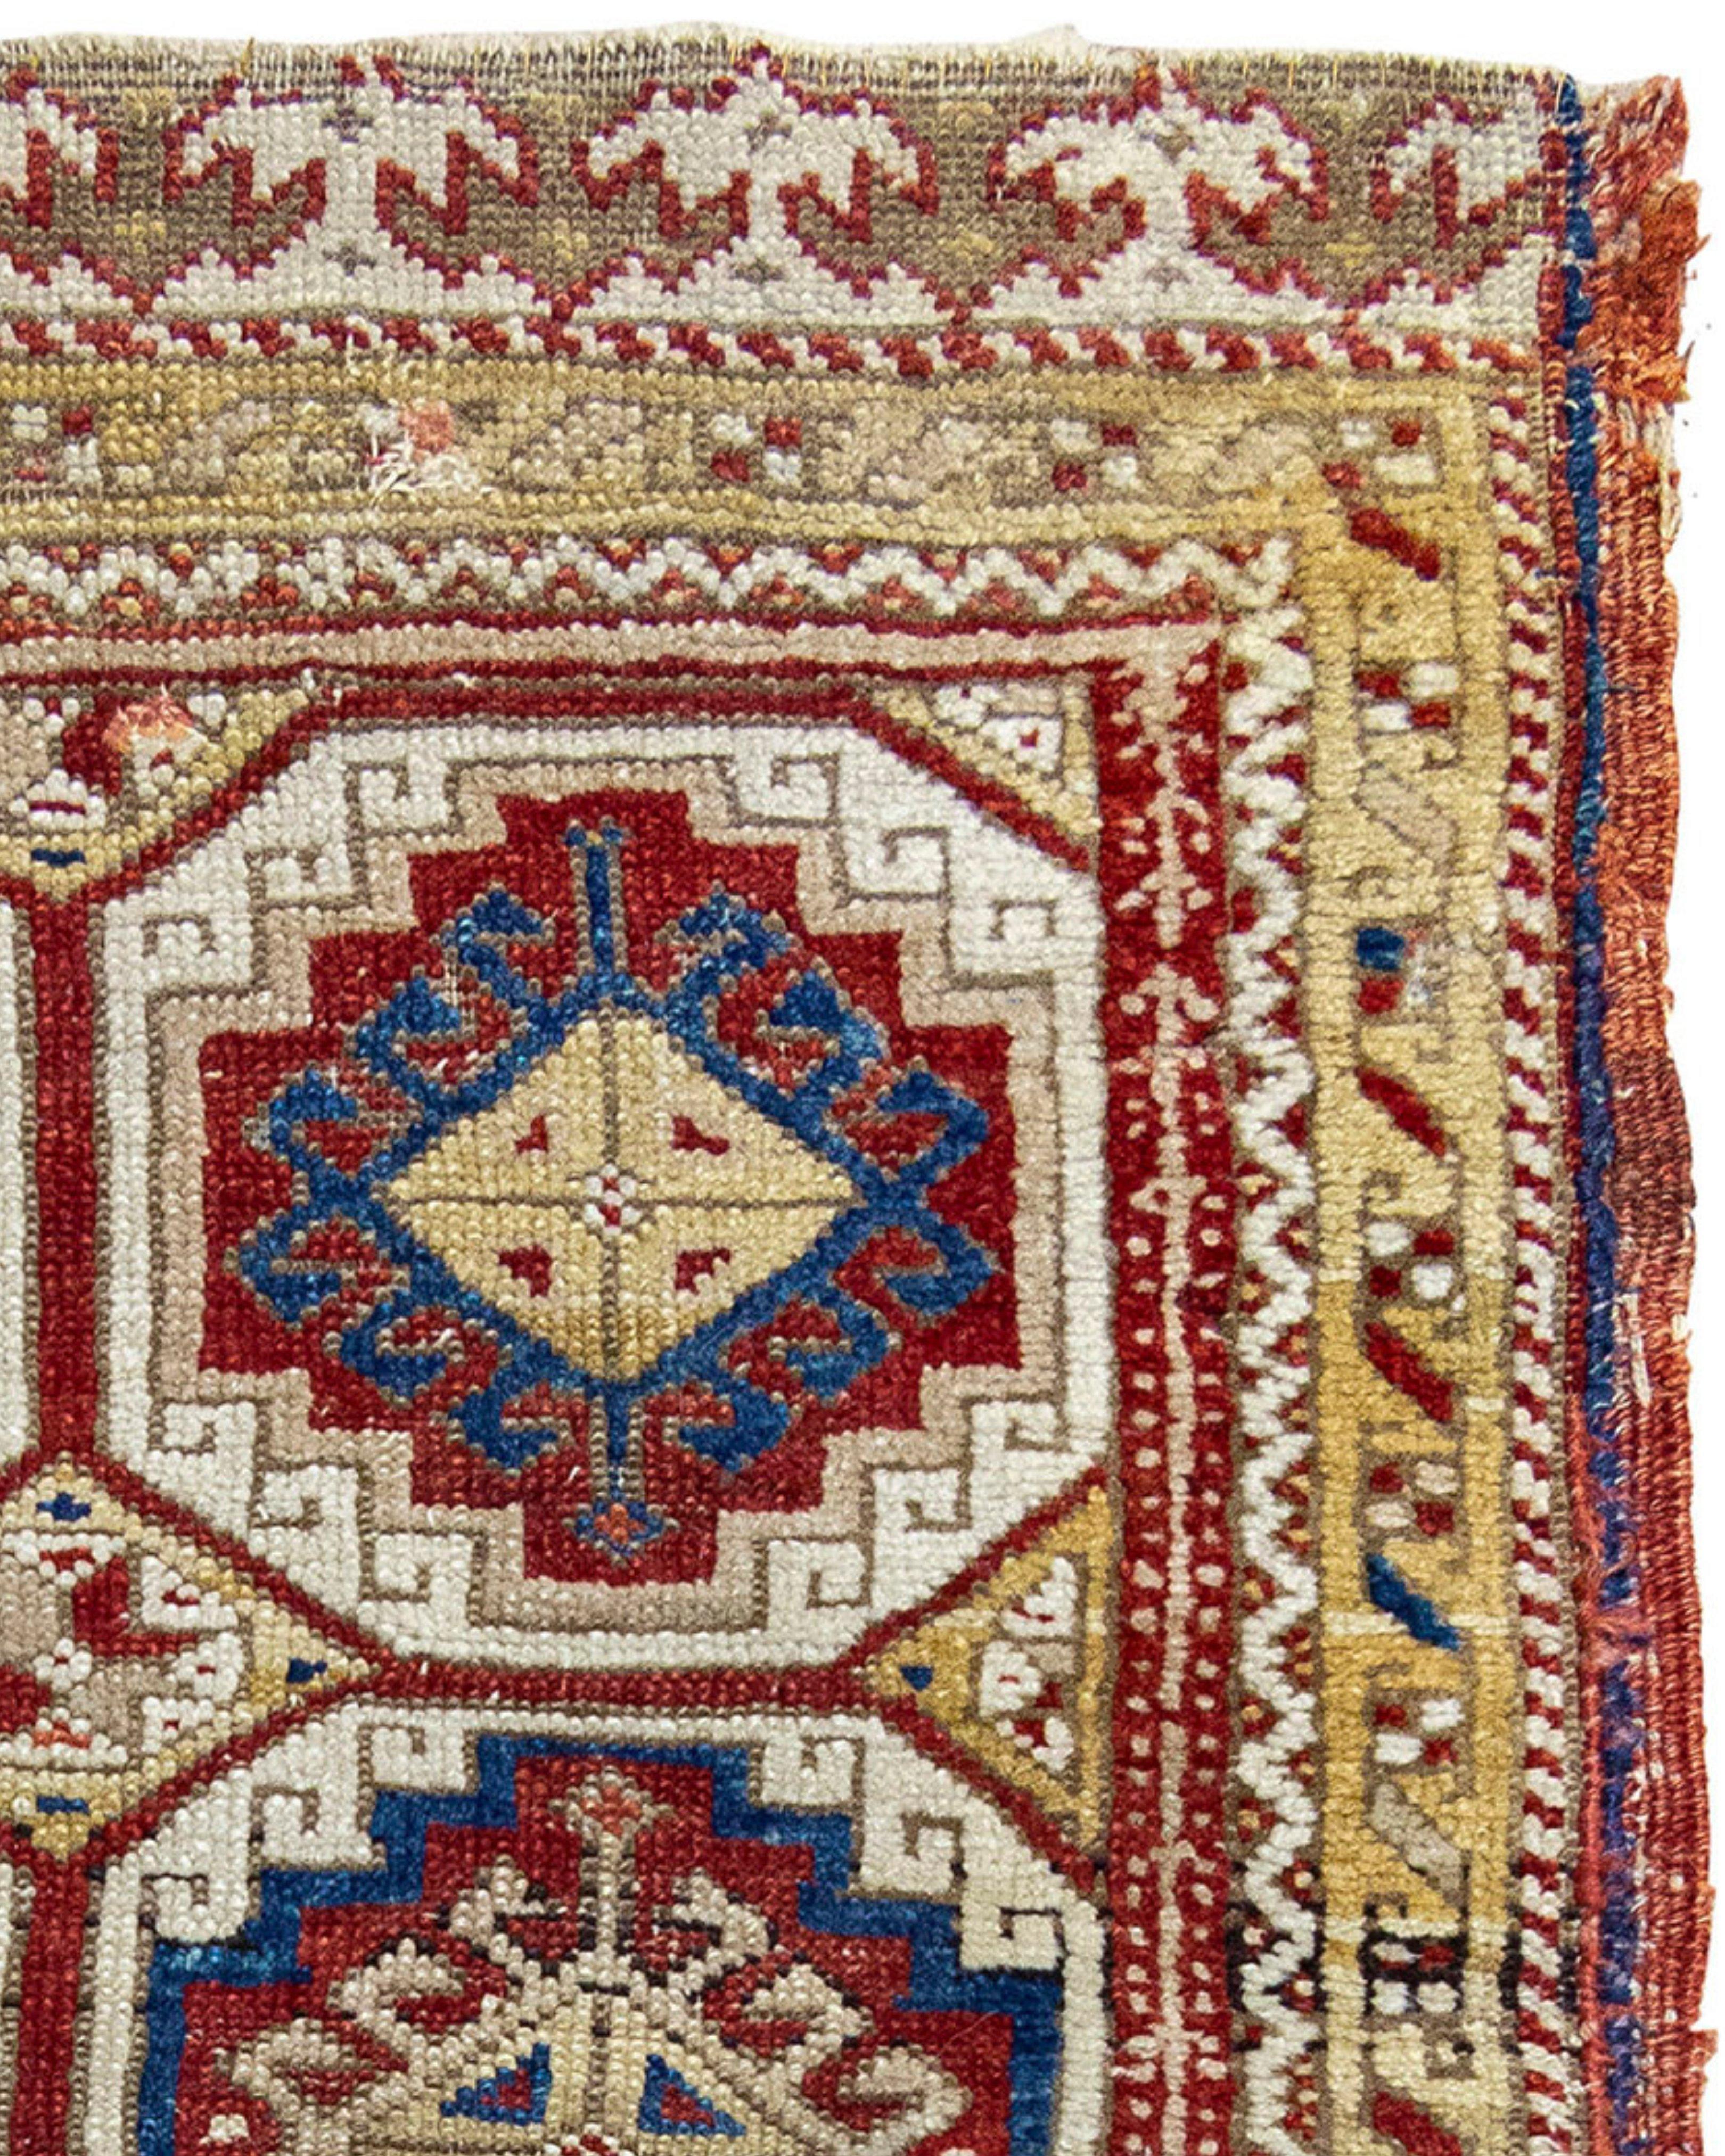 Hand-Knotted Antique Turkish Konya Yastik Rug, Mid-19th century For Sale